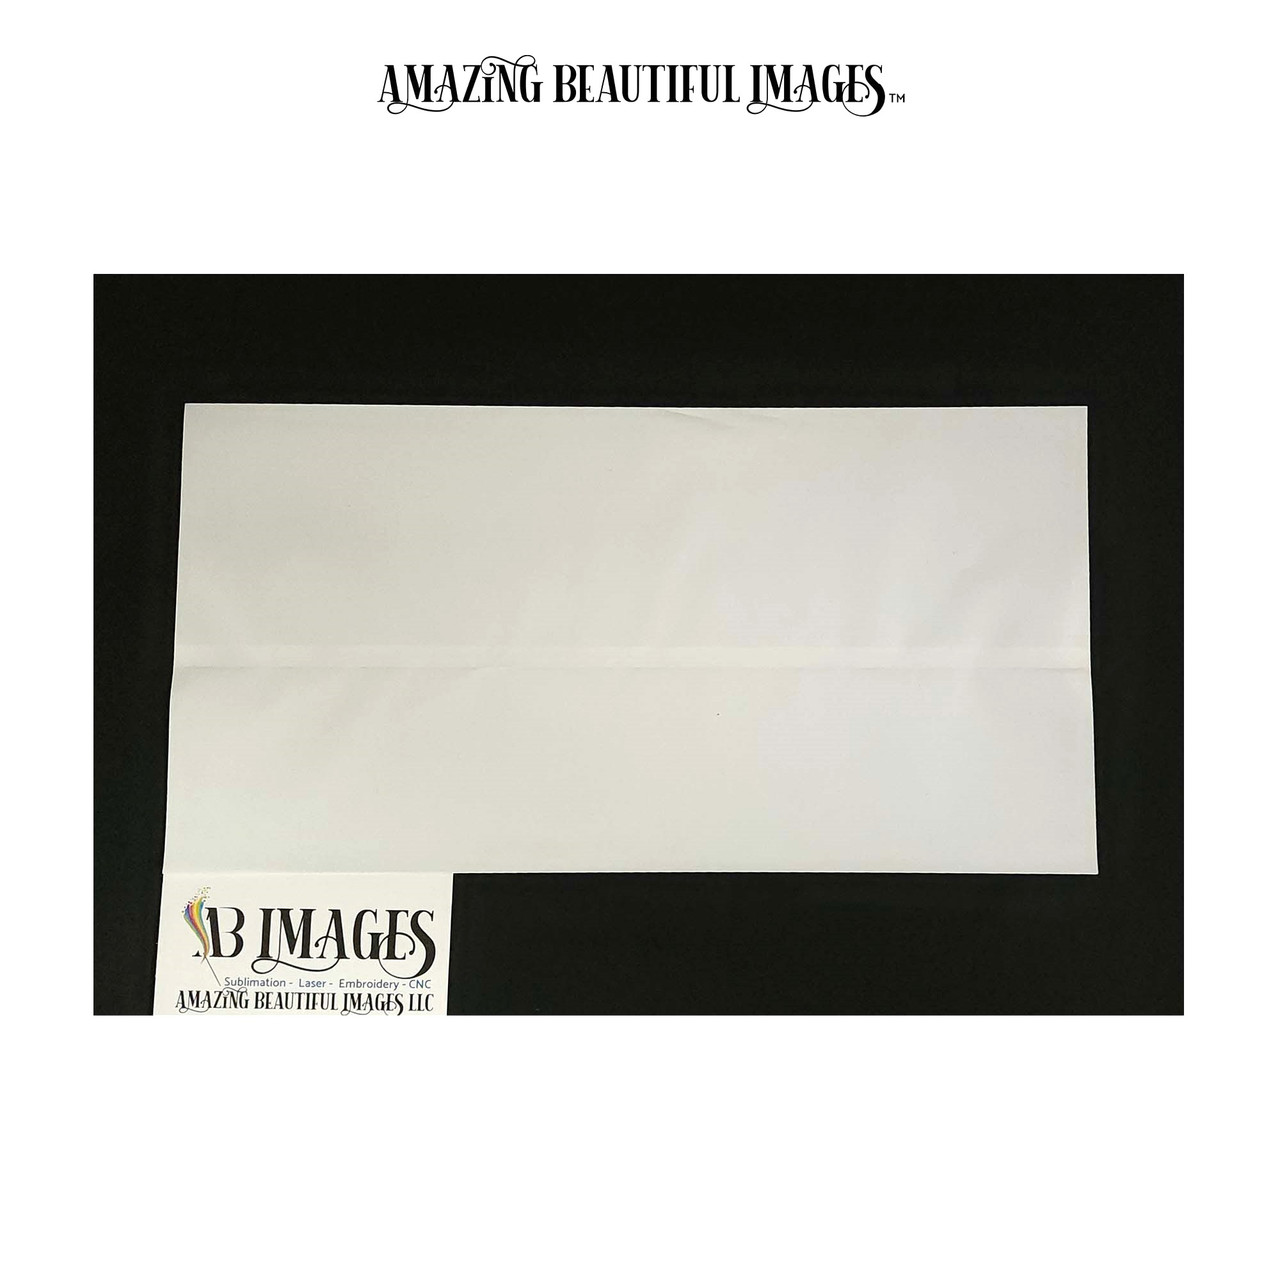 Sublimation Shrink Wrap Sleeves - Sublimation Tools - Quick Blanks & More